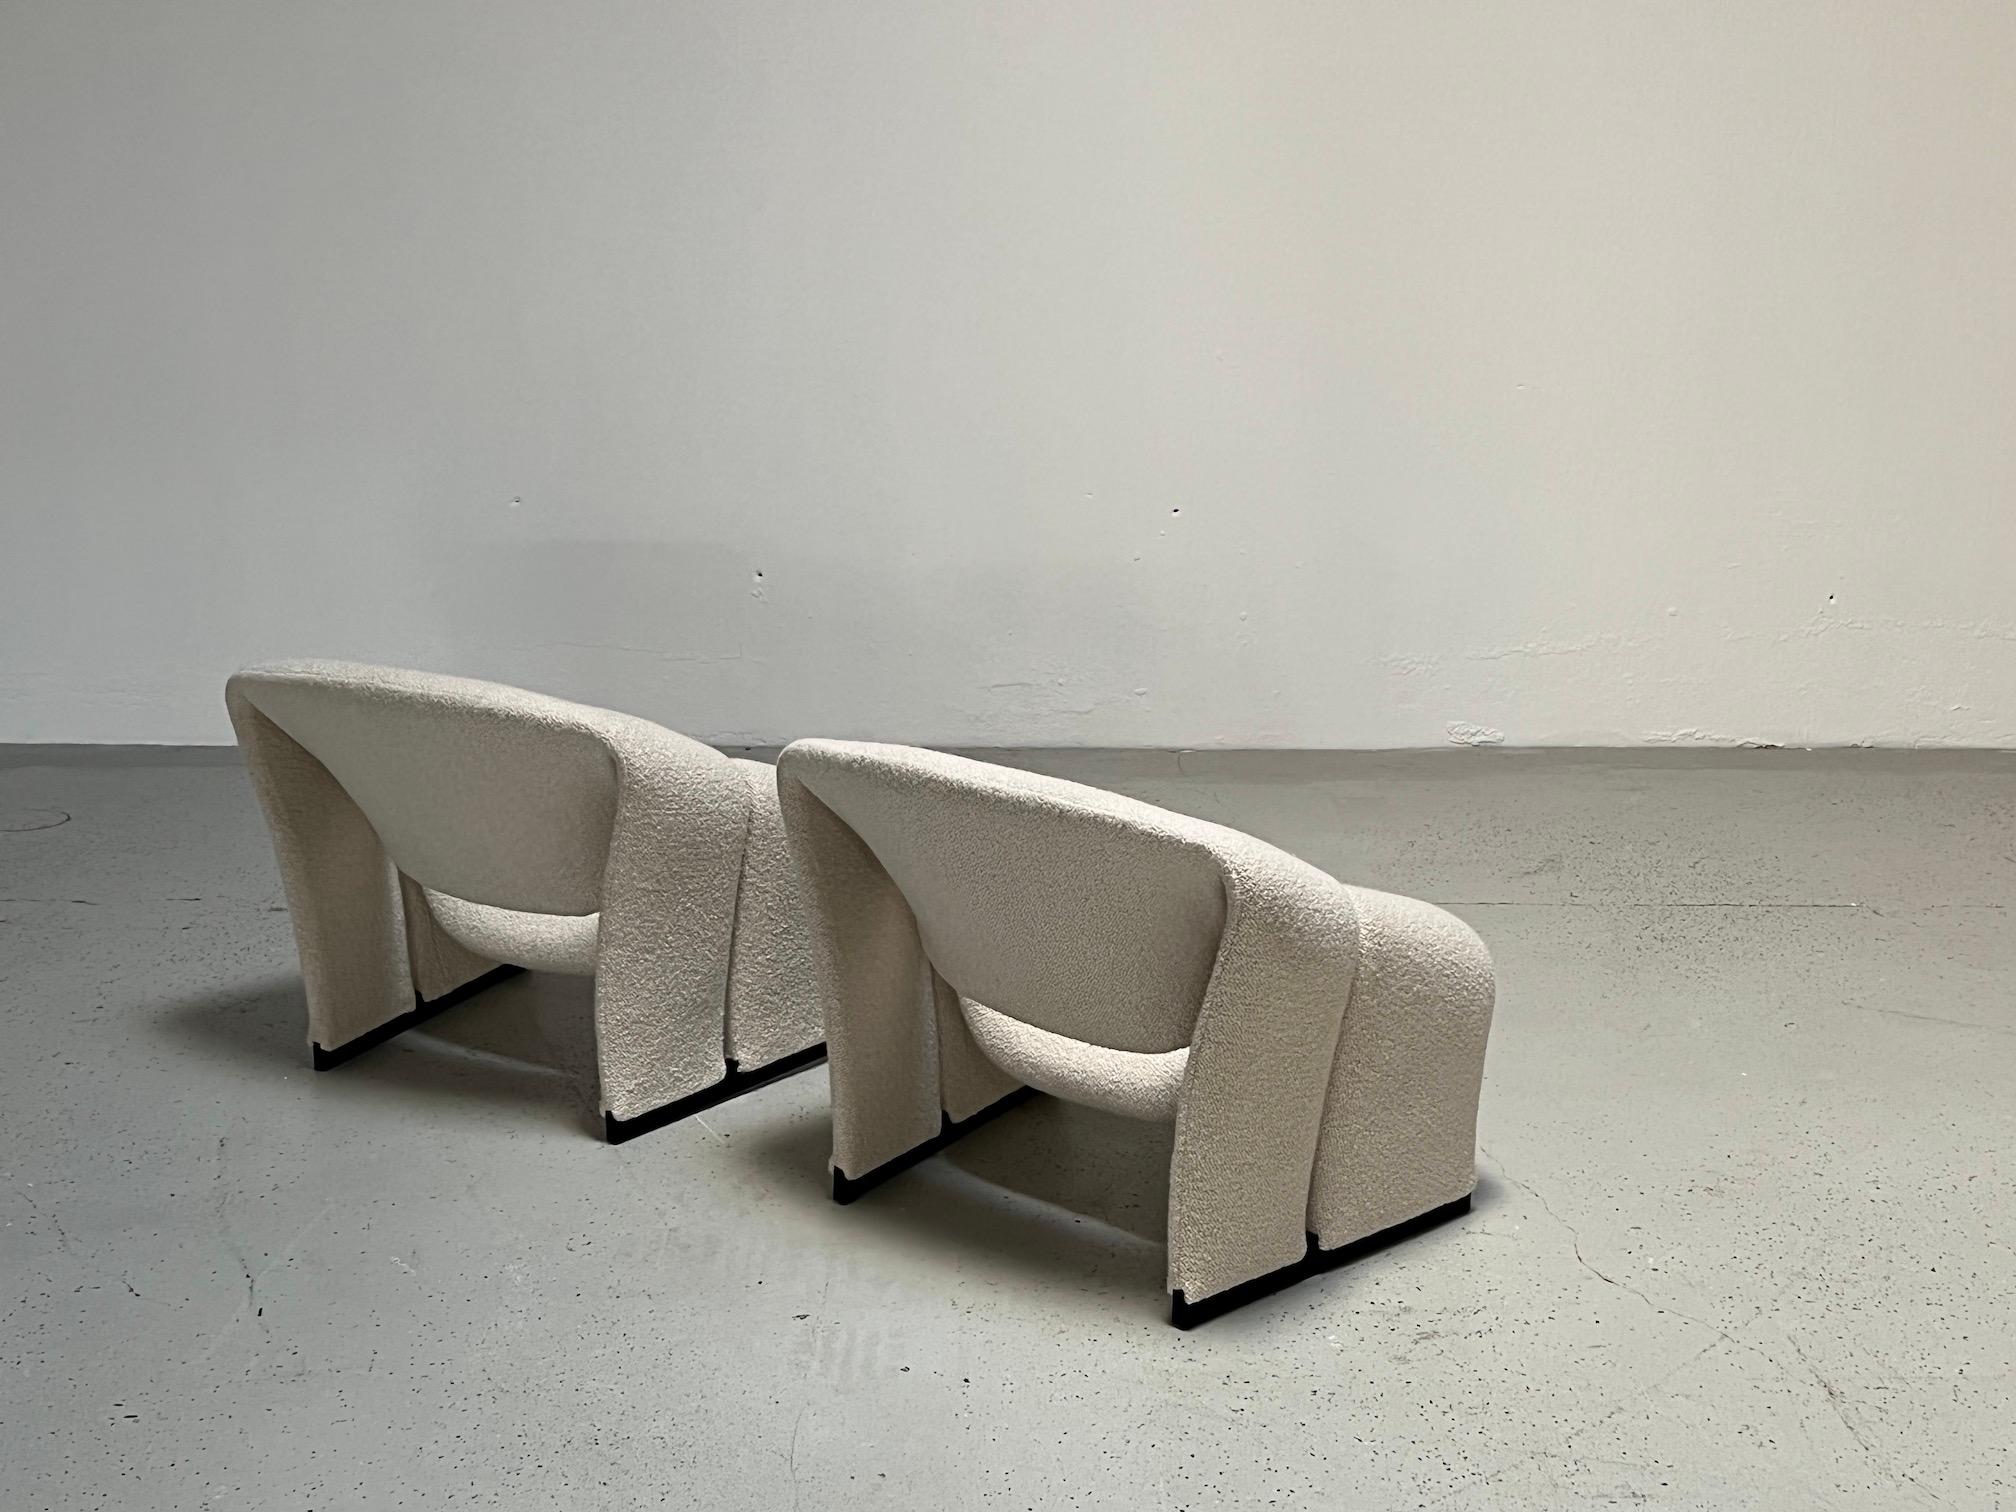 Pair of Early F580 Groovy Chairs by Pierre Paulin for Artifort 4